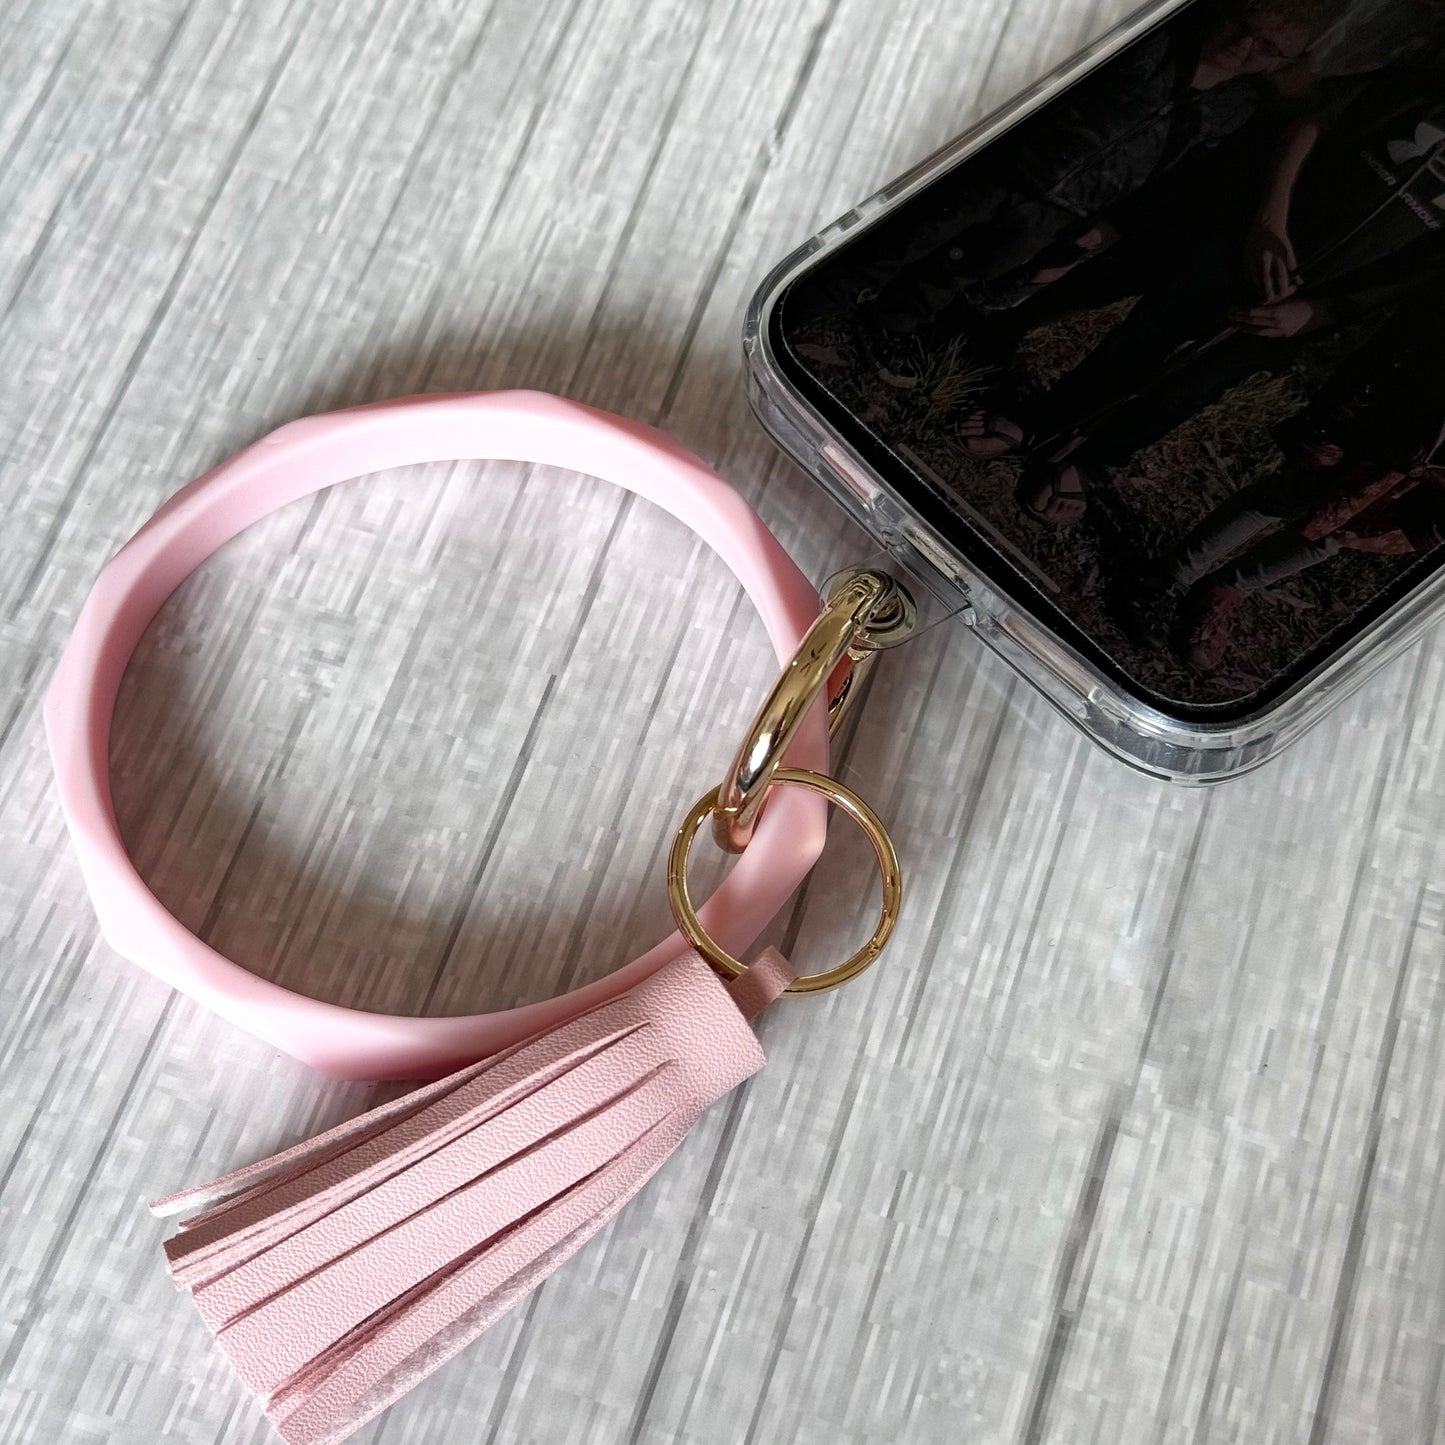 Phone Bracelet Keychain with Tether Tab - NEON PINK